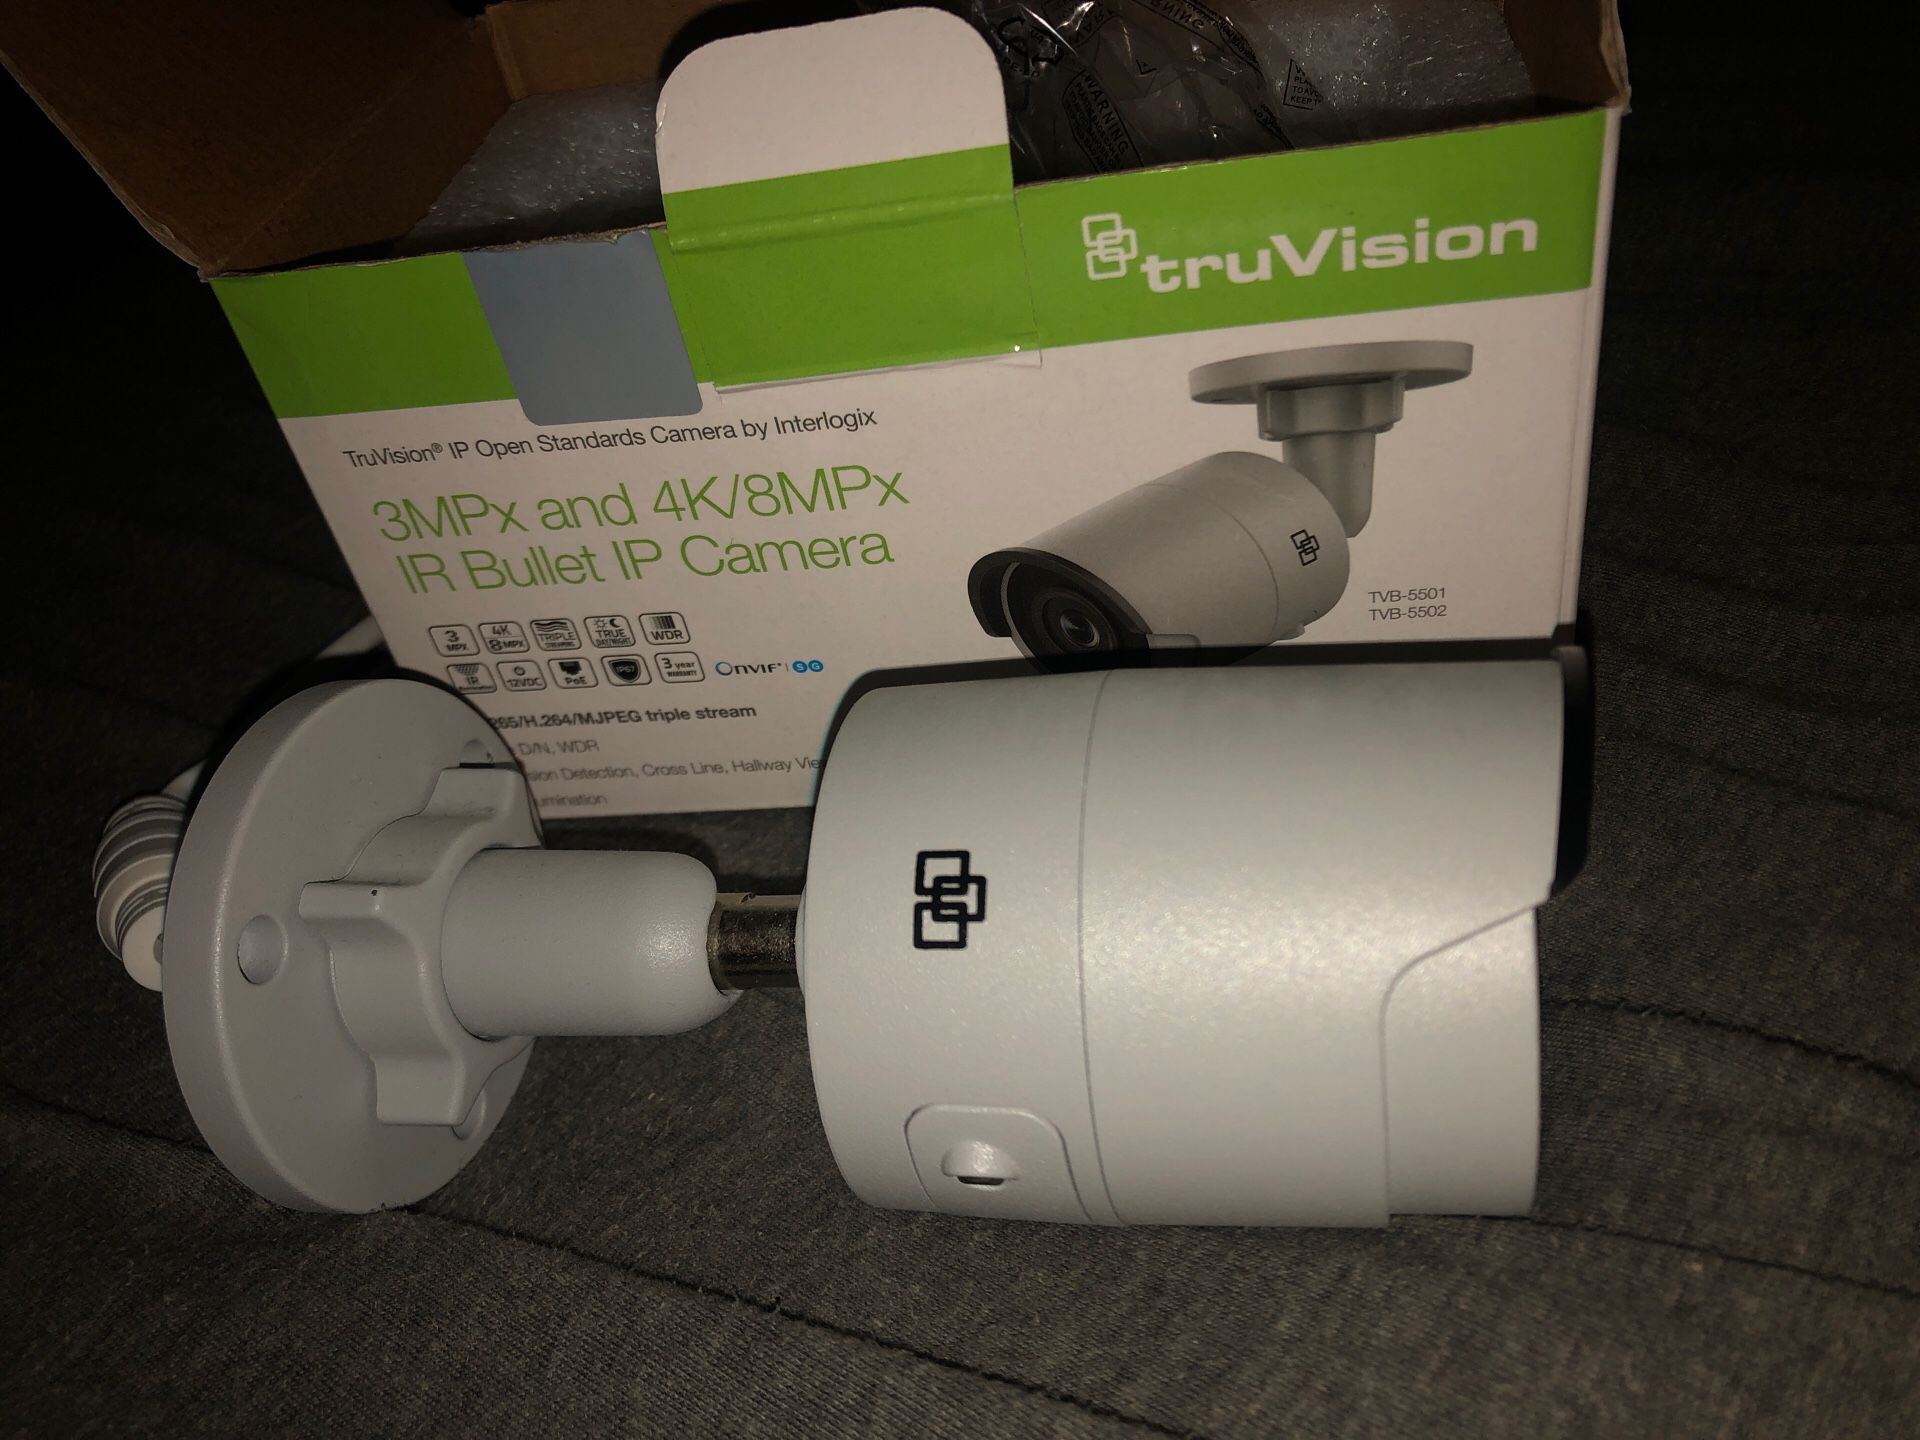 Truvision 3mpx and 4k/8mpx IR bullet IP camera